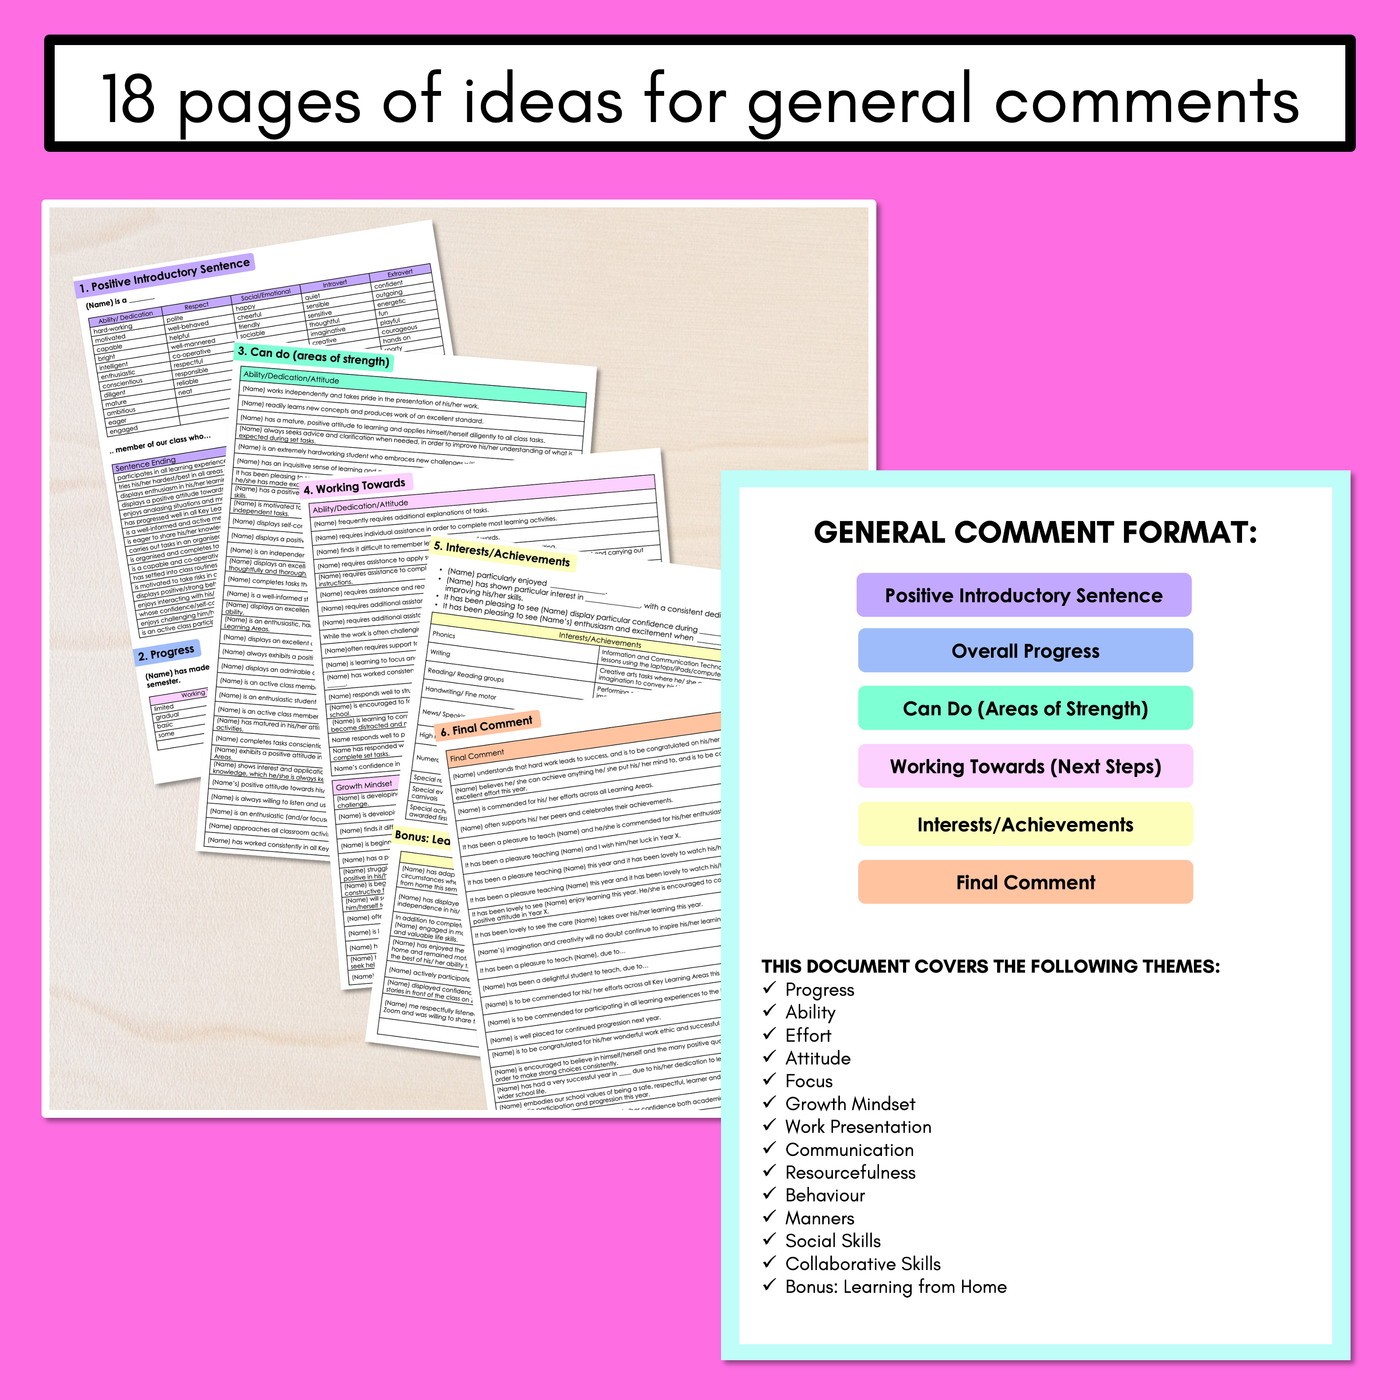 Report Comments - Word Bank for General Comments